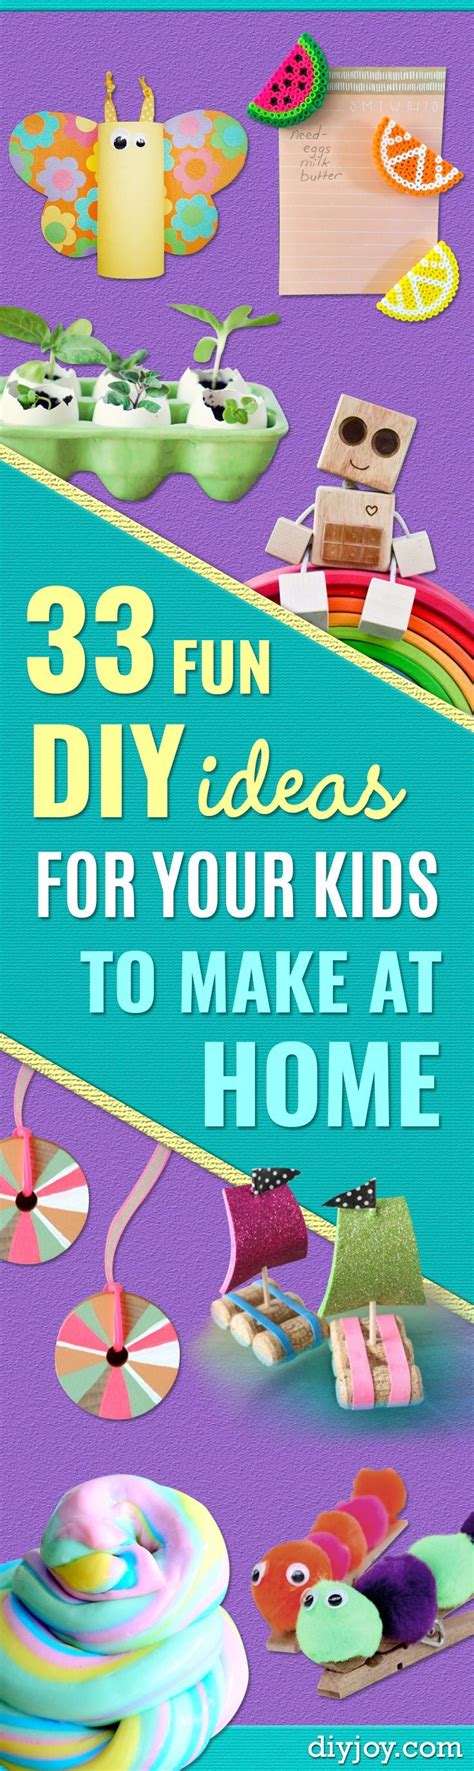 33 Diy Ideas For The Kids To Make At Home Diy For Kids Craft